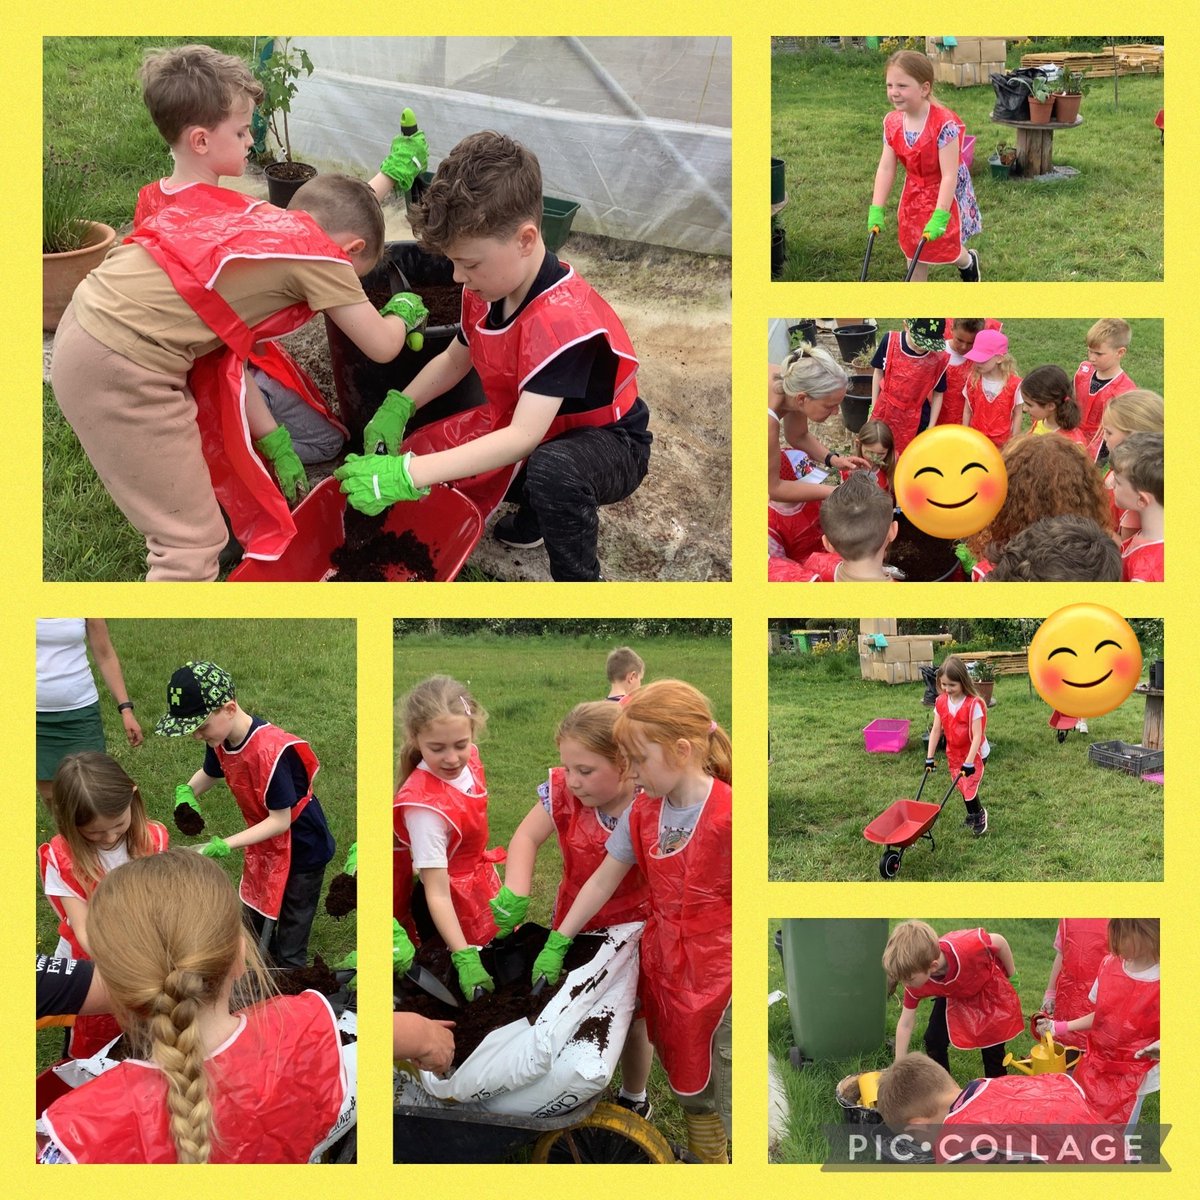 Year 2 had a very busy afternoon gardening. Their tasks included filling pots with compost, lots of planting including onions, carrots, runner beans as well as watering and finding sticks. We can't wait for next week!